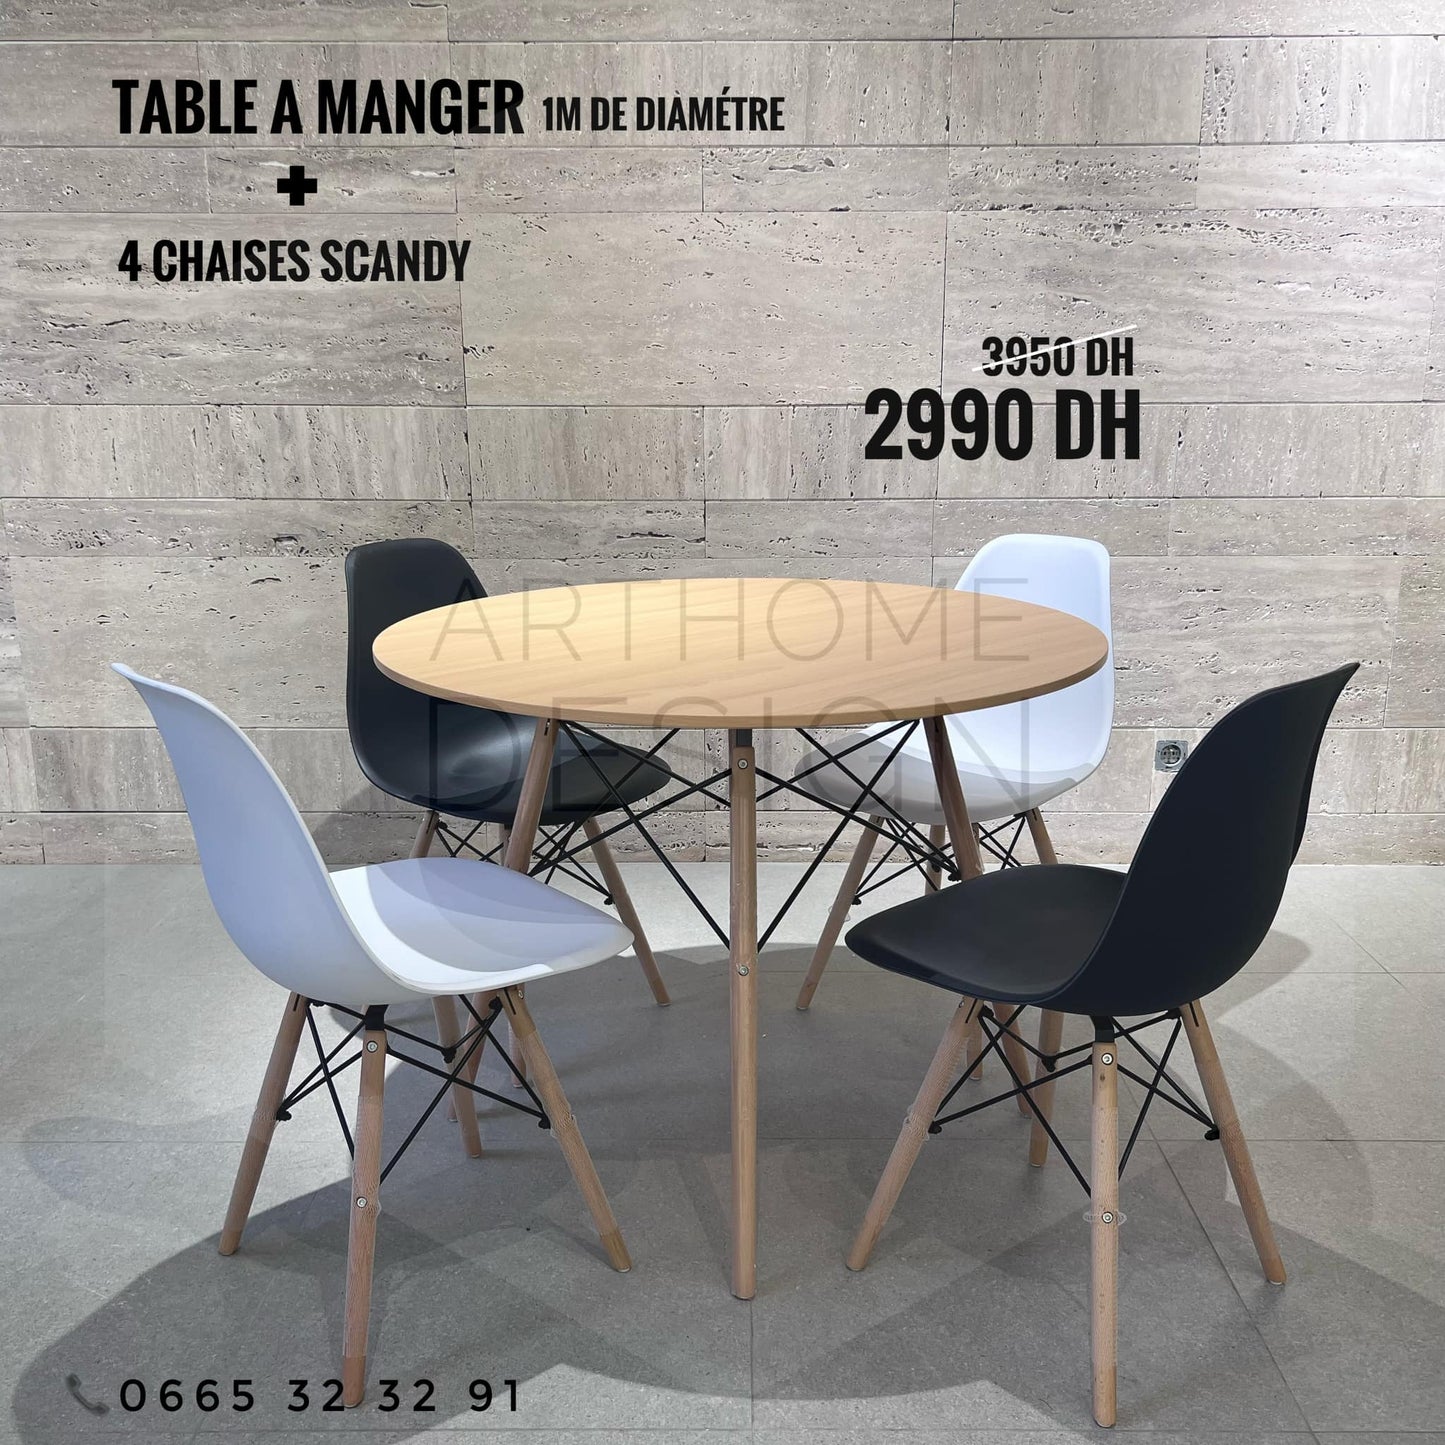 TABLE A MANGER 1M + 4 CHAISES SCANDY